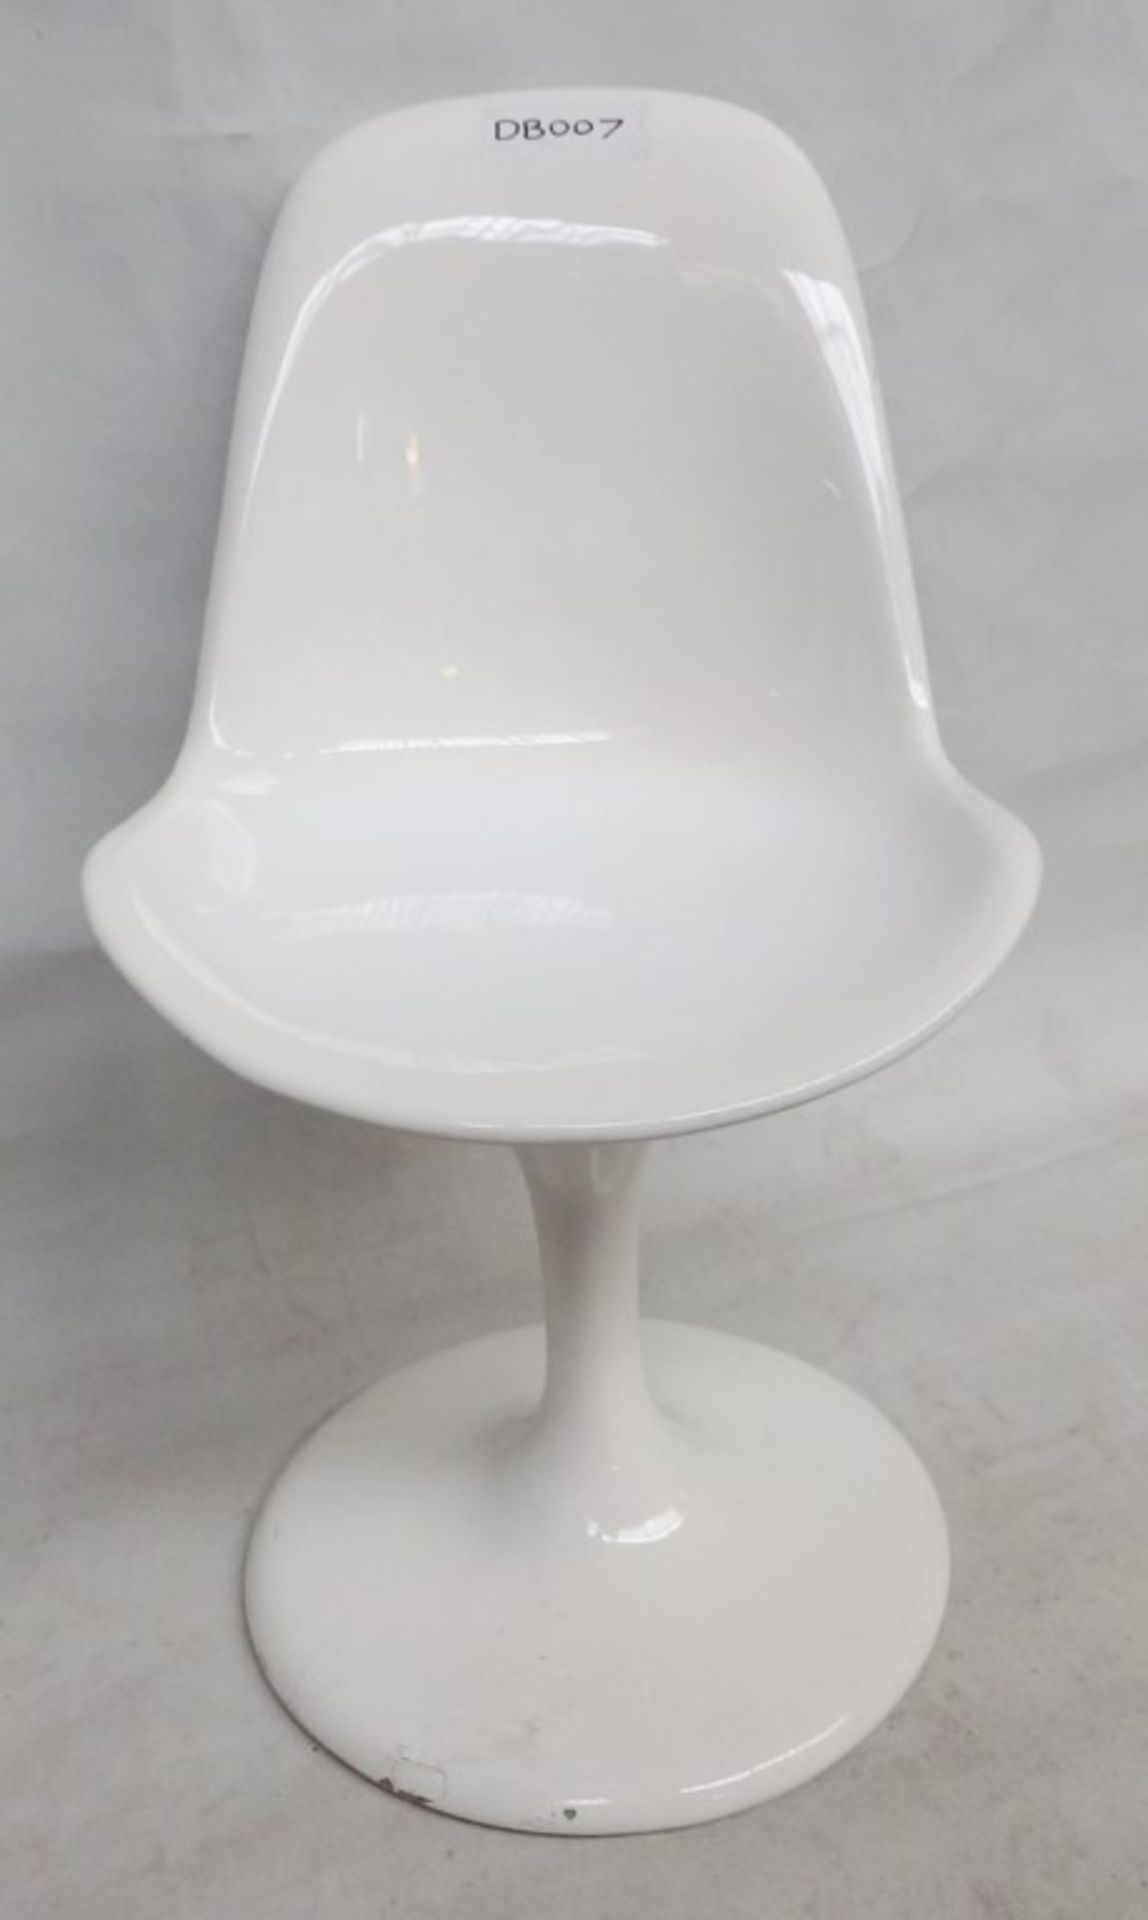 1 x Retro Style Swivel Chair With A White Hi-gloss Finish - Includes Cushion As Shown - - Image 5 of 14